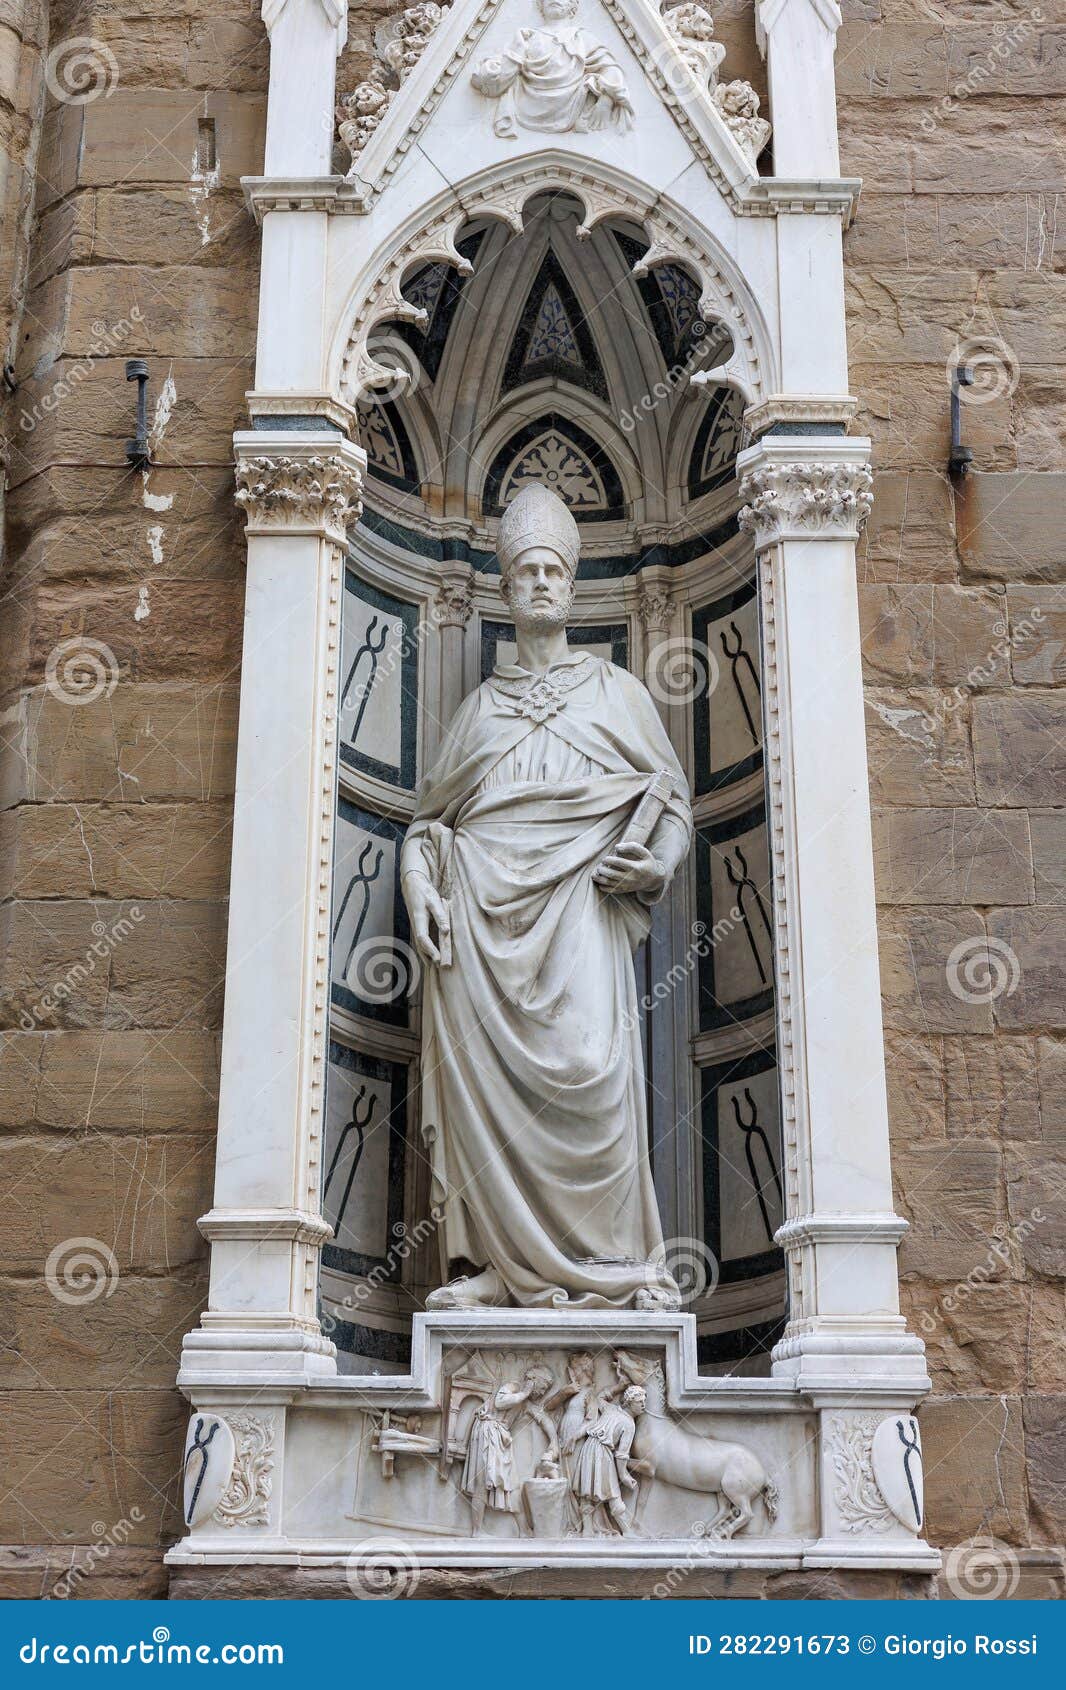 statue of saint eligius in the tabernacle in the exterior perimeter of the church of orsanmichele in florence, italy